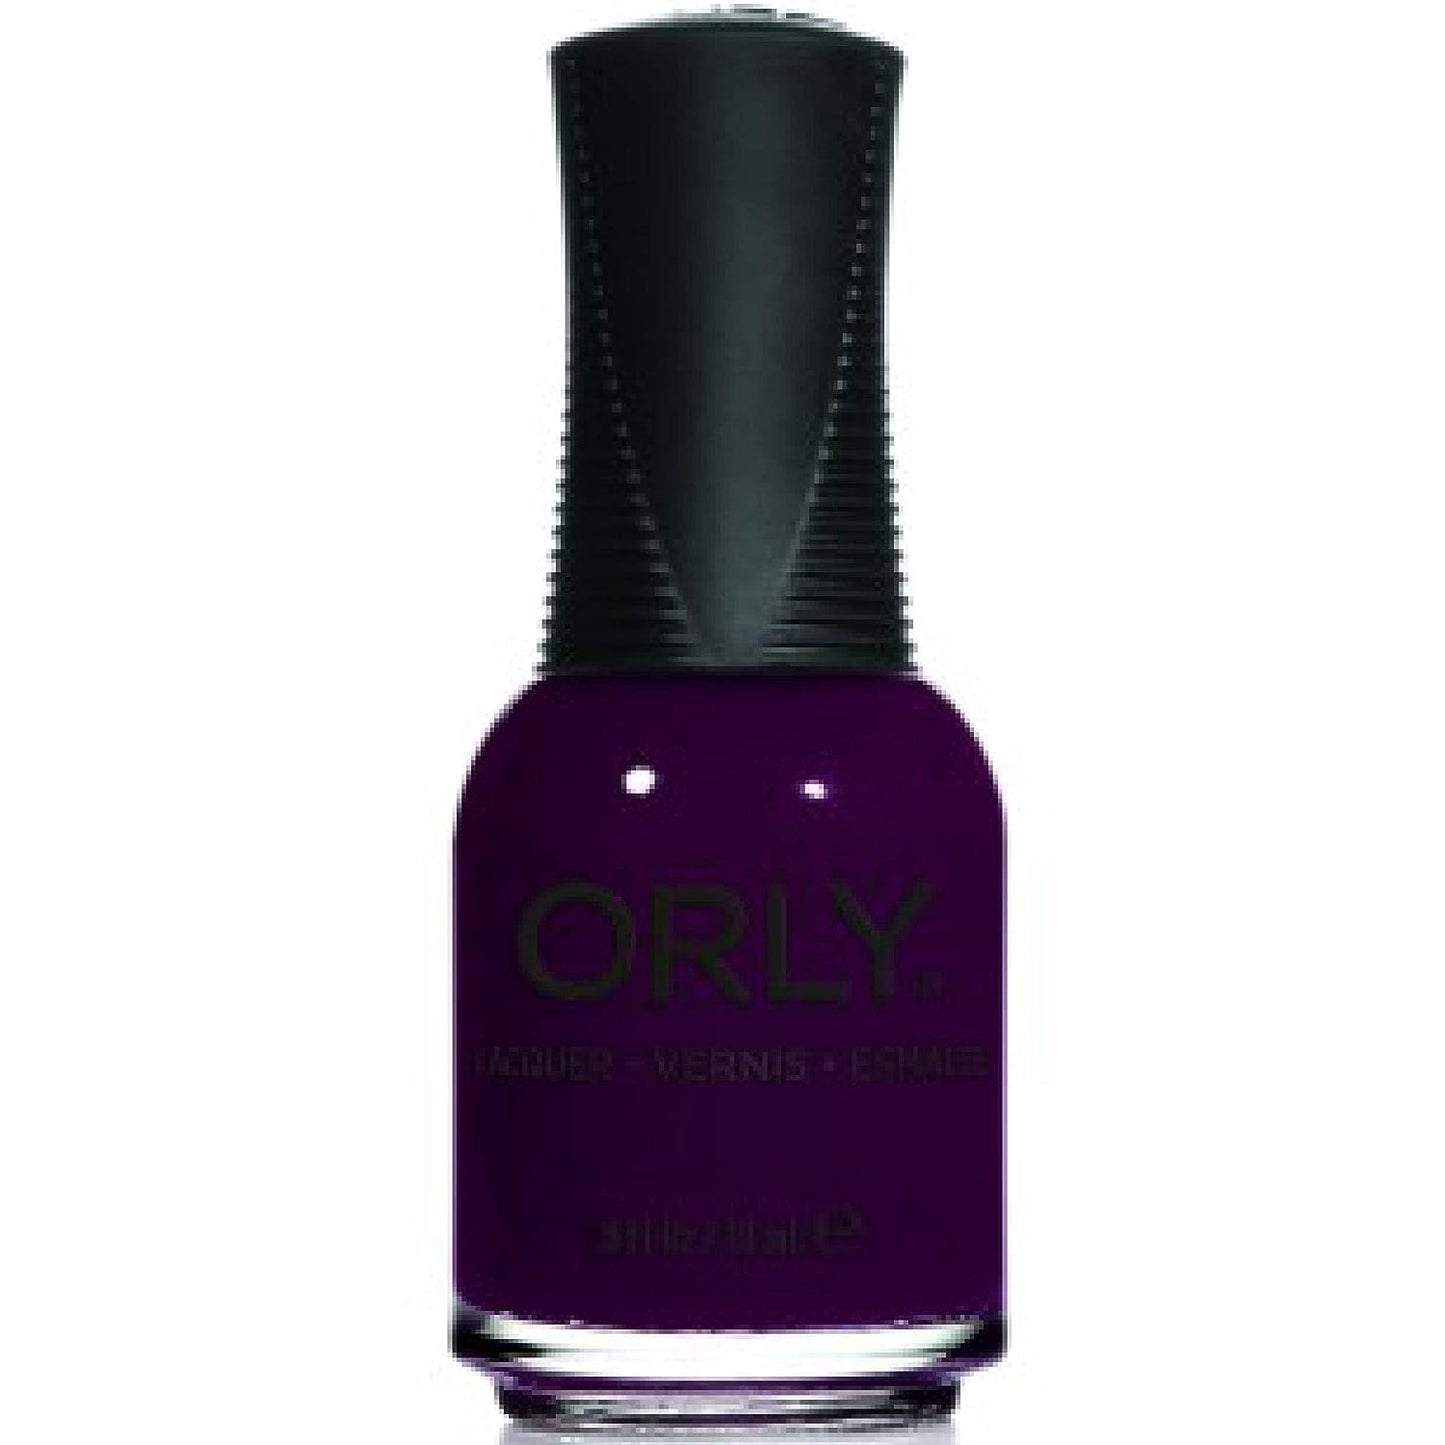 Orly Nail Lacquer - Plum Noir (Clearance) - Universal Nail Supplies